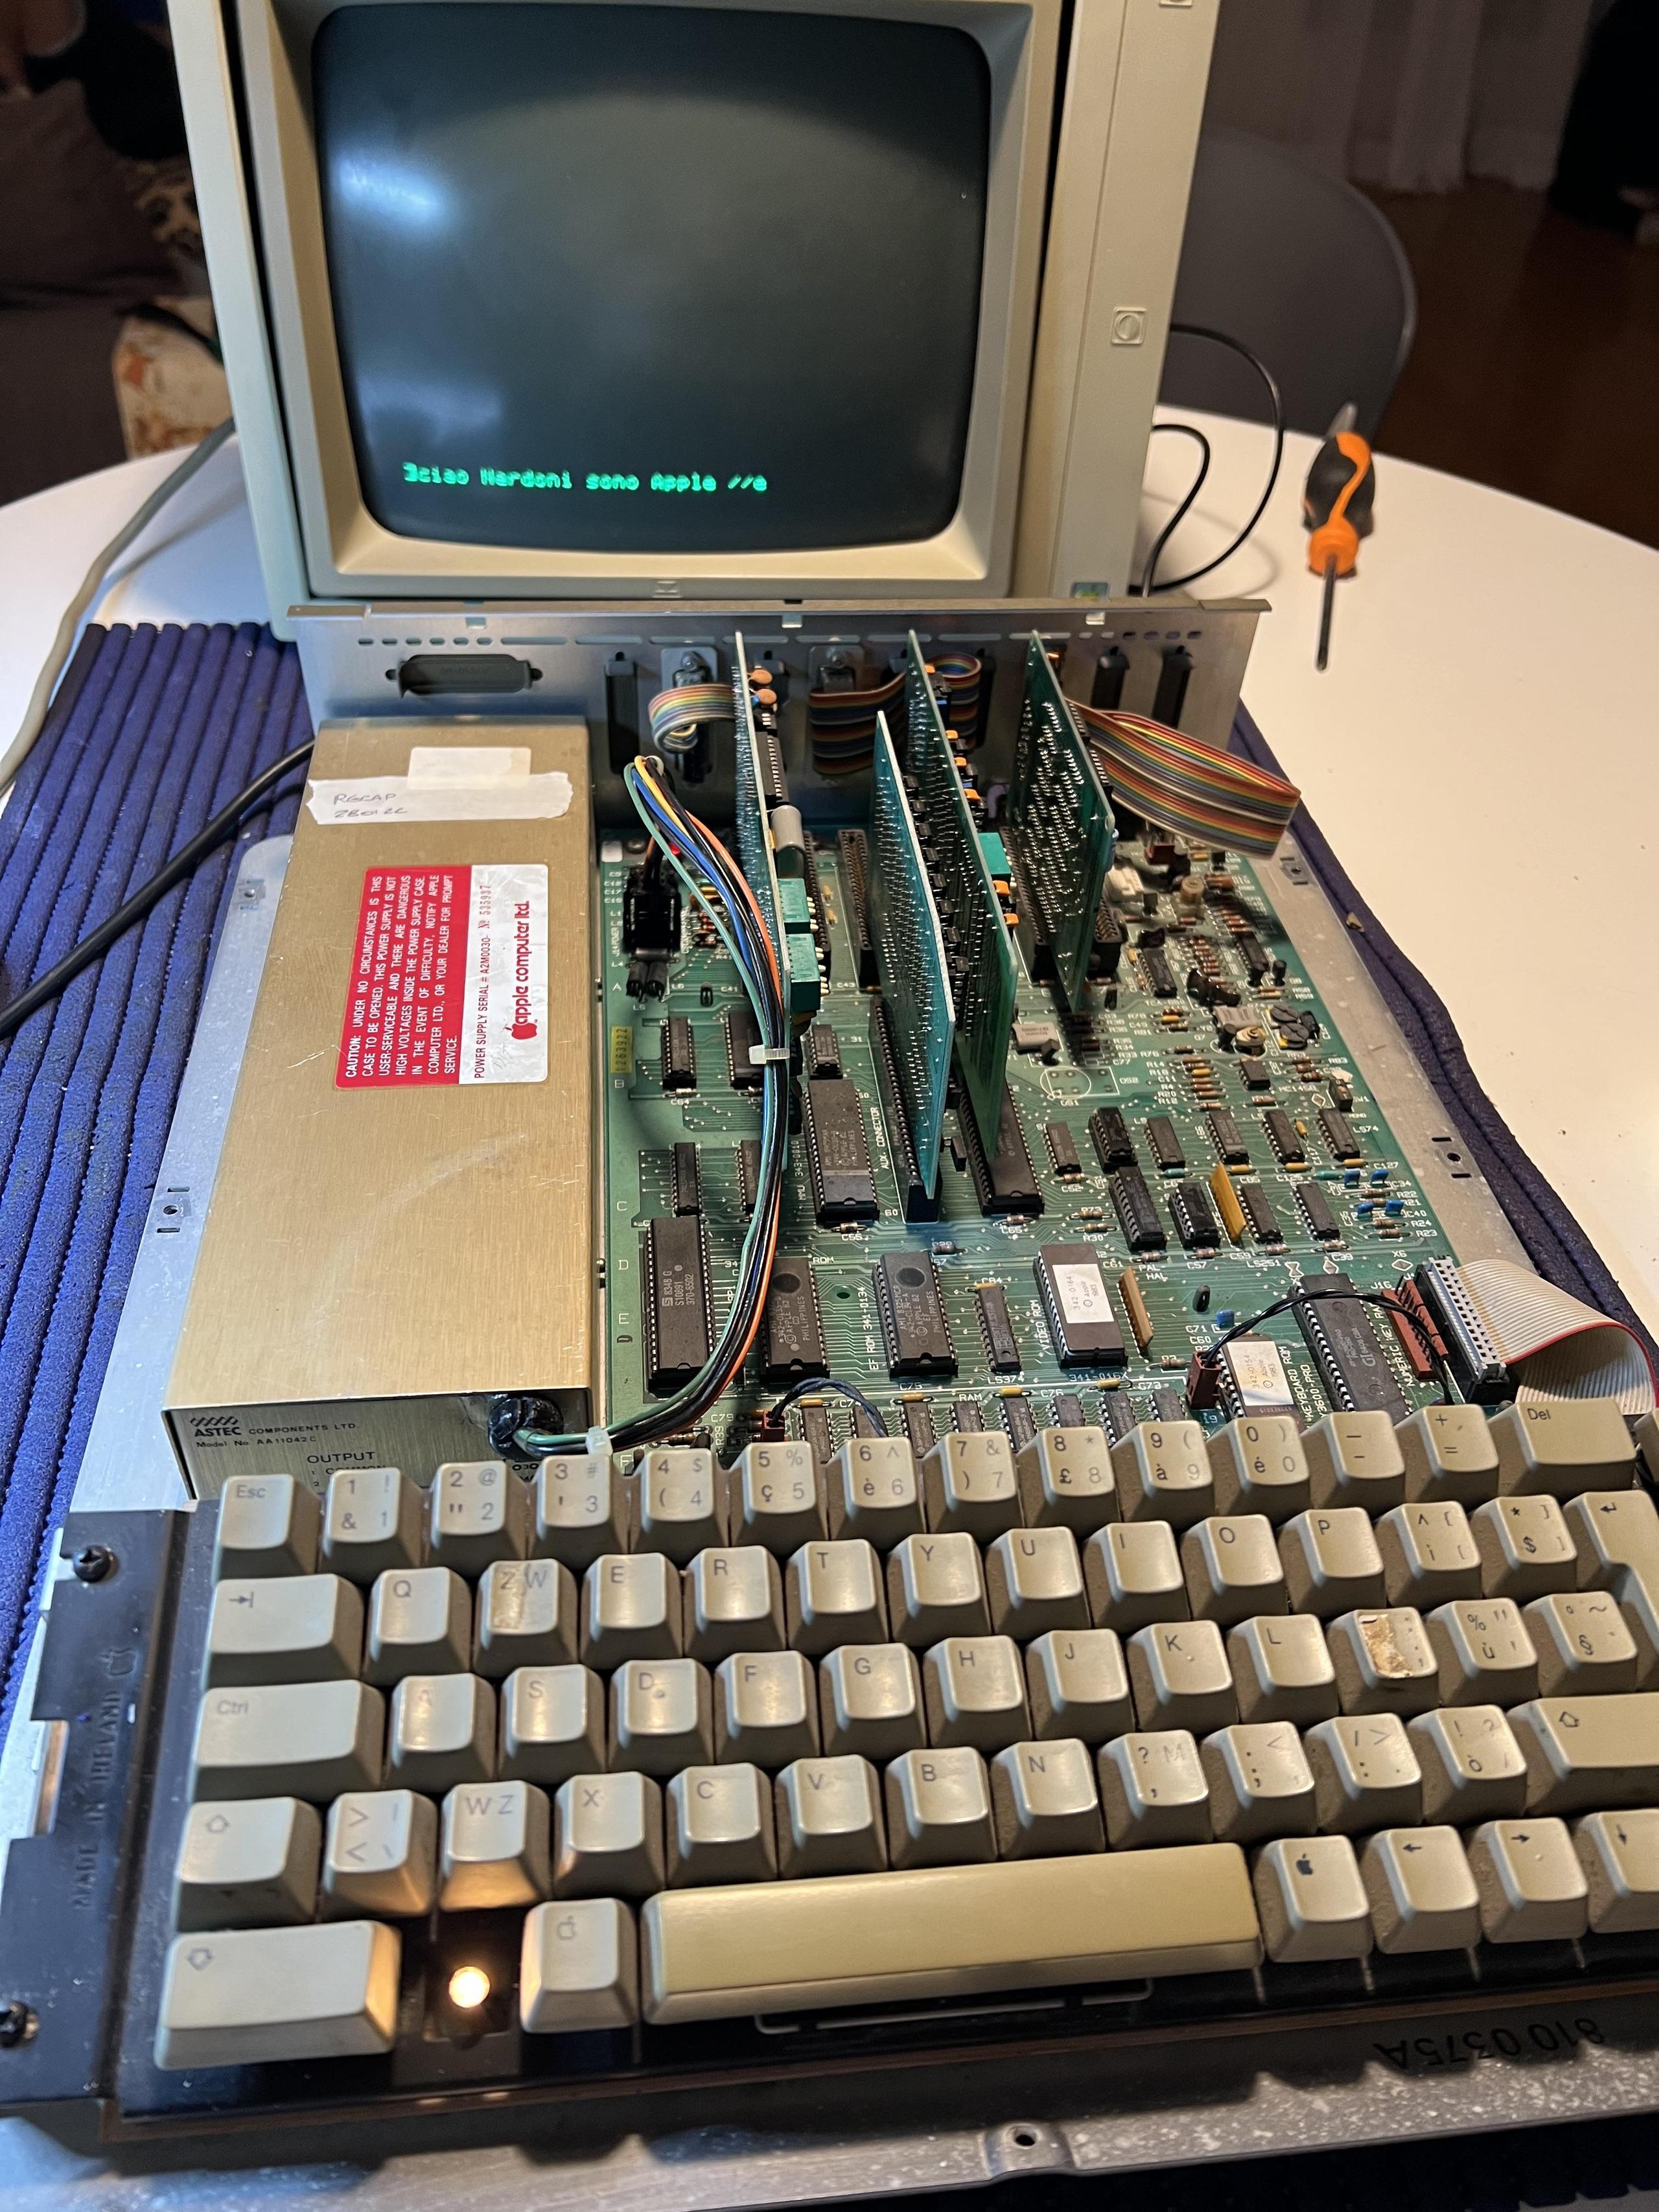 the Apple II is back to life!